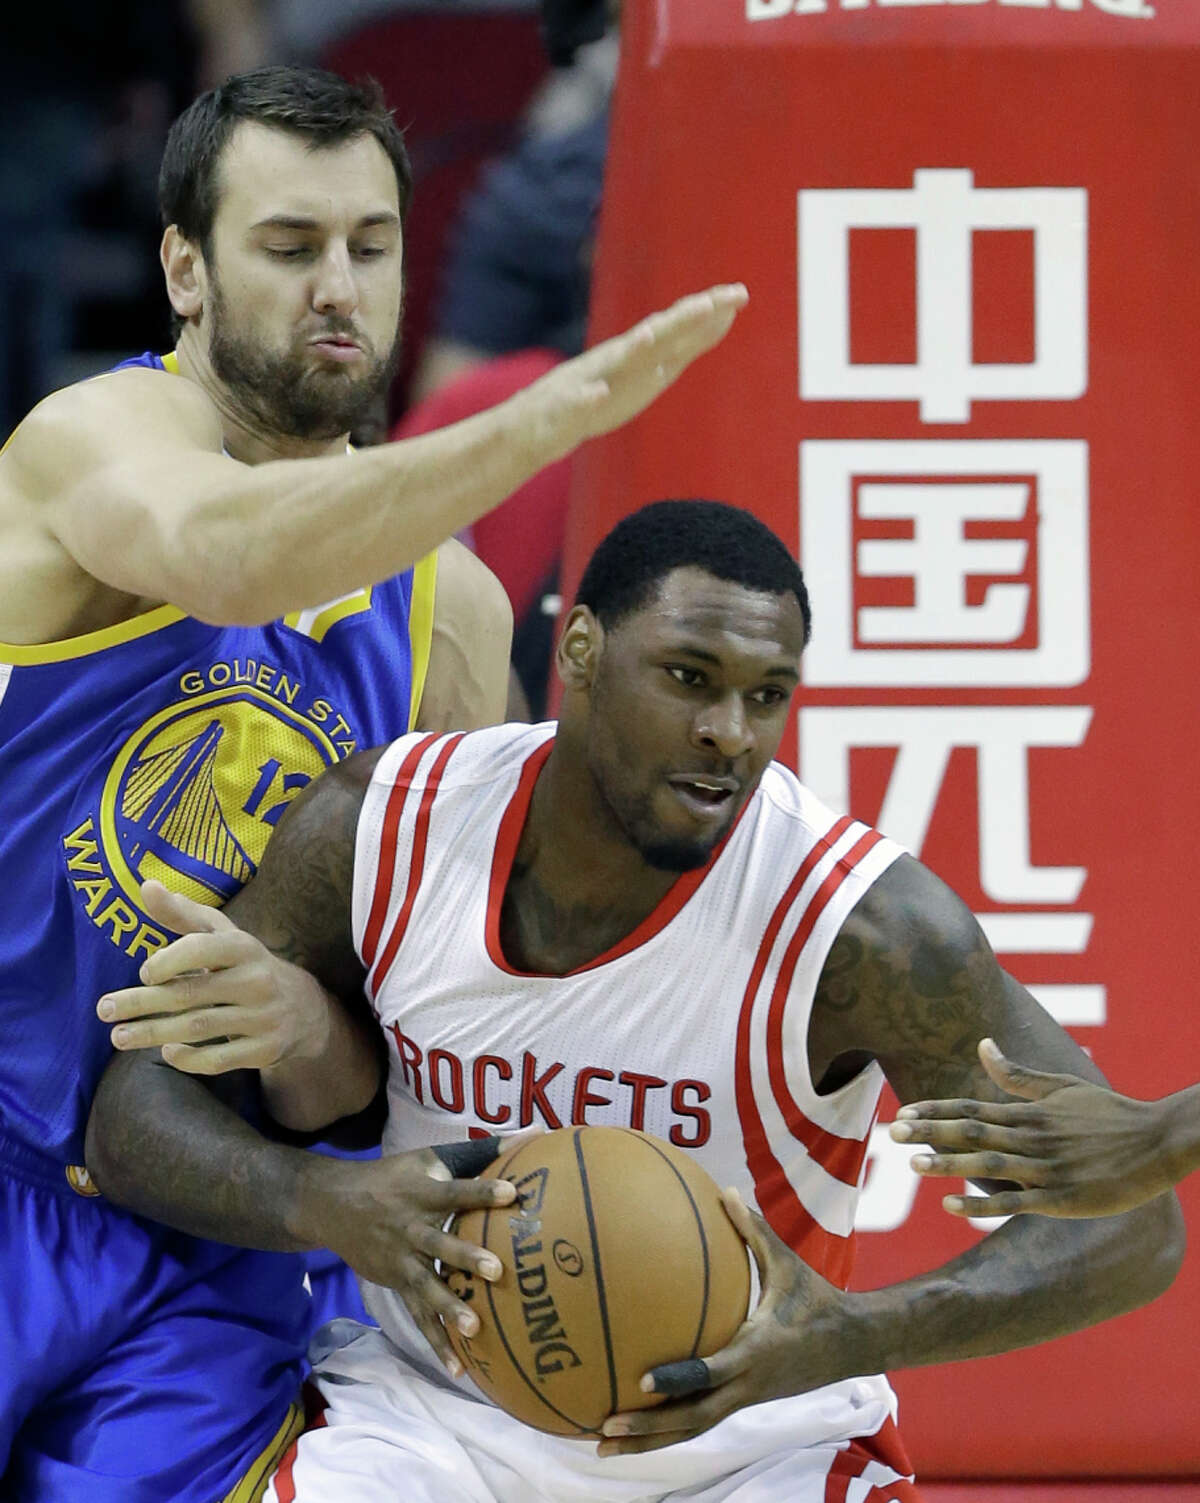 Andrew Bogut, who had eight points and 18 rebounds, defends against the Rockets’ Tarik Black in the first half.